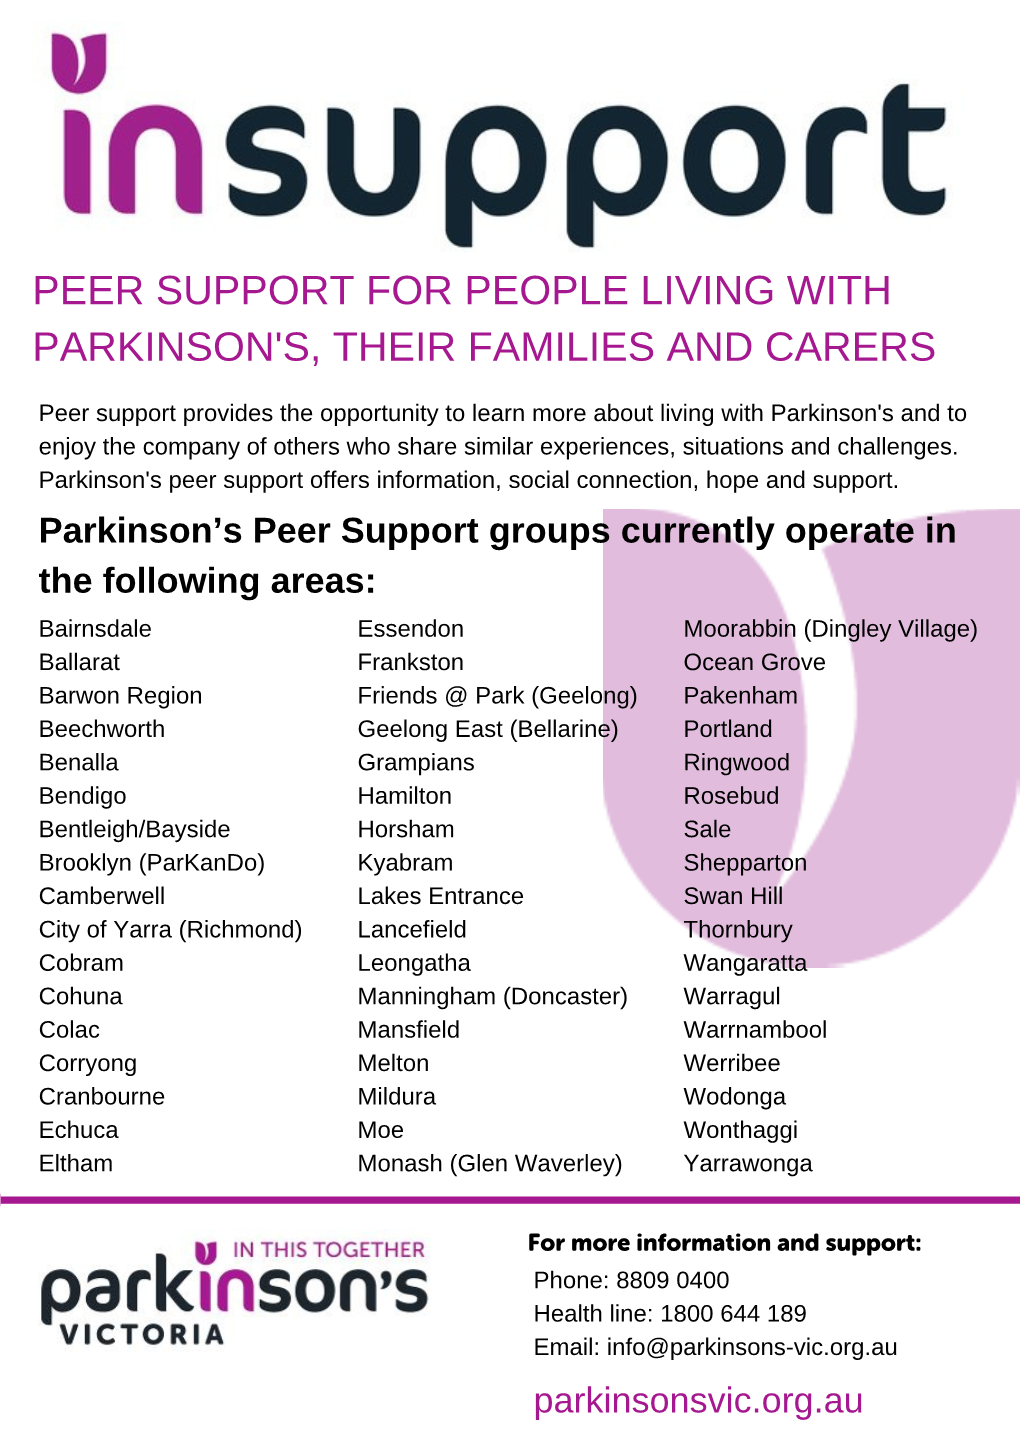 Peer Support for People Living with Parkinson's, Their Families and Carers